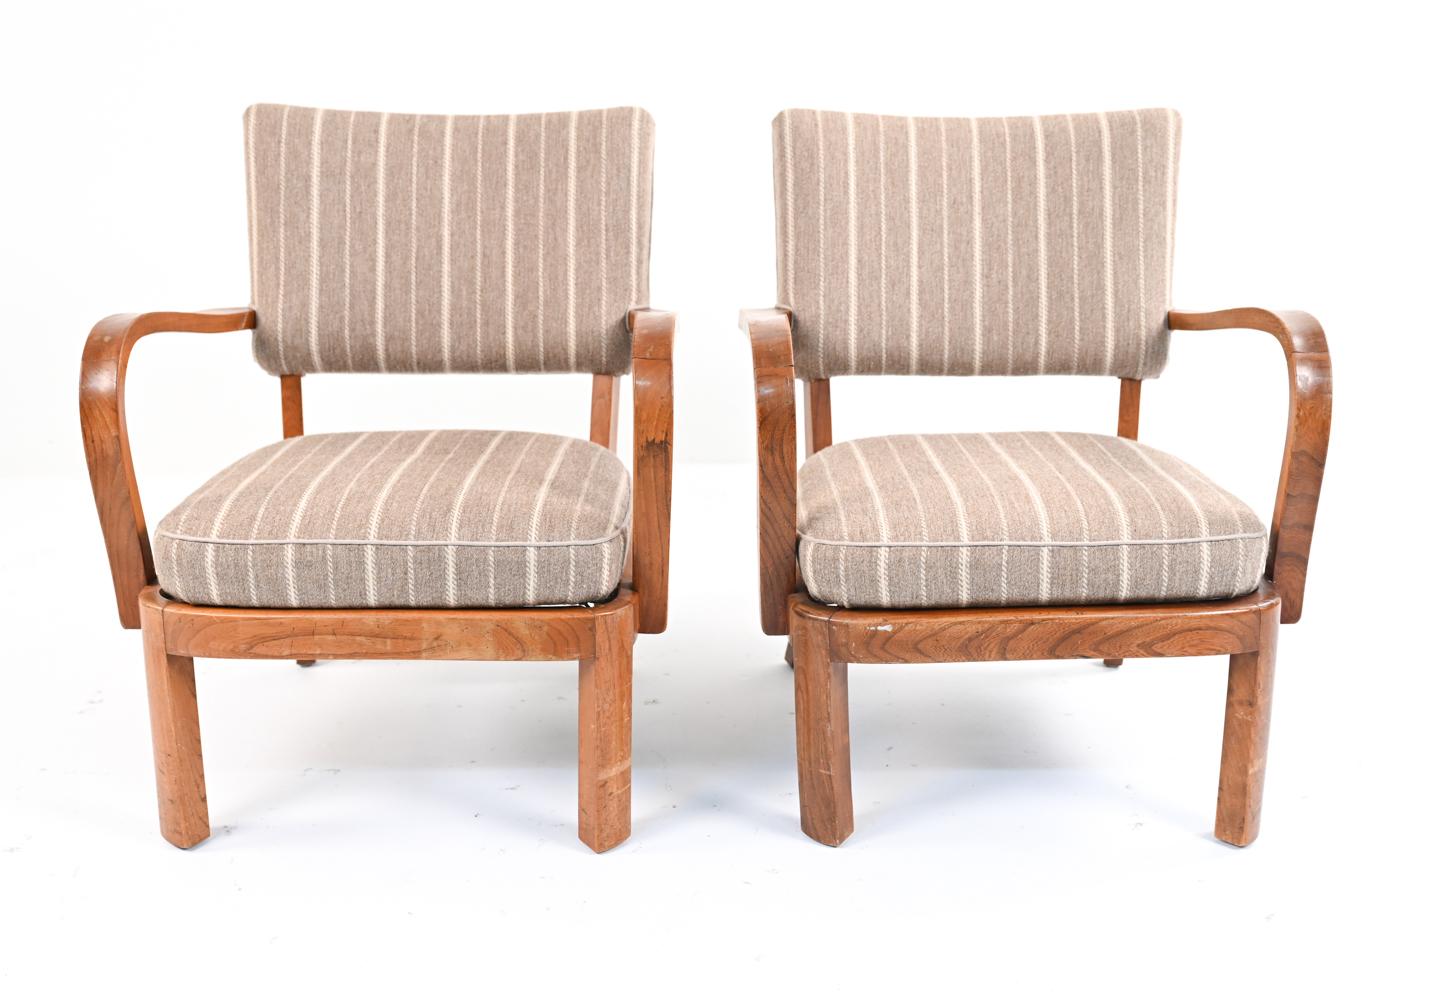 These rare armchairs, with their fine craftsmanship and rounded, clean lines - bridge the gap between the Art Deco and Mid-Century styles, blending French Modernism with Scandinavian practicality and proportions. They feature solid elm wood frames,